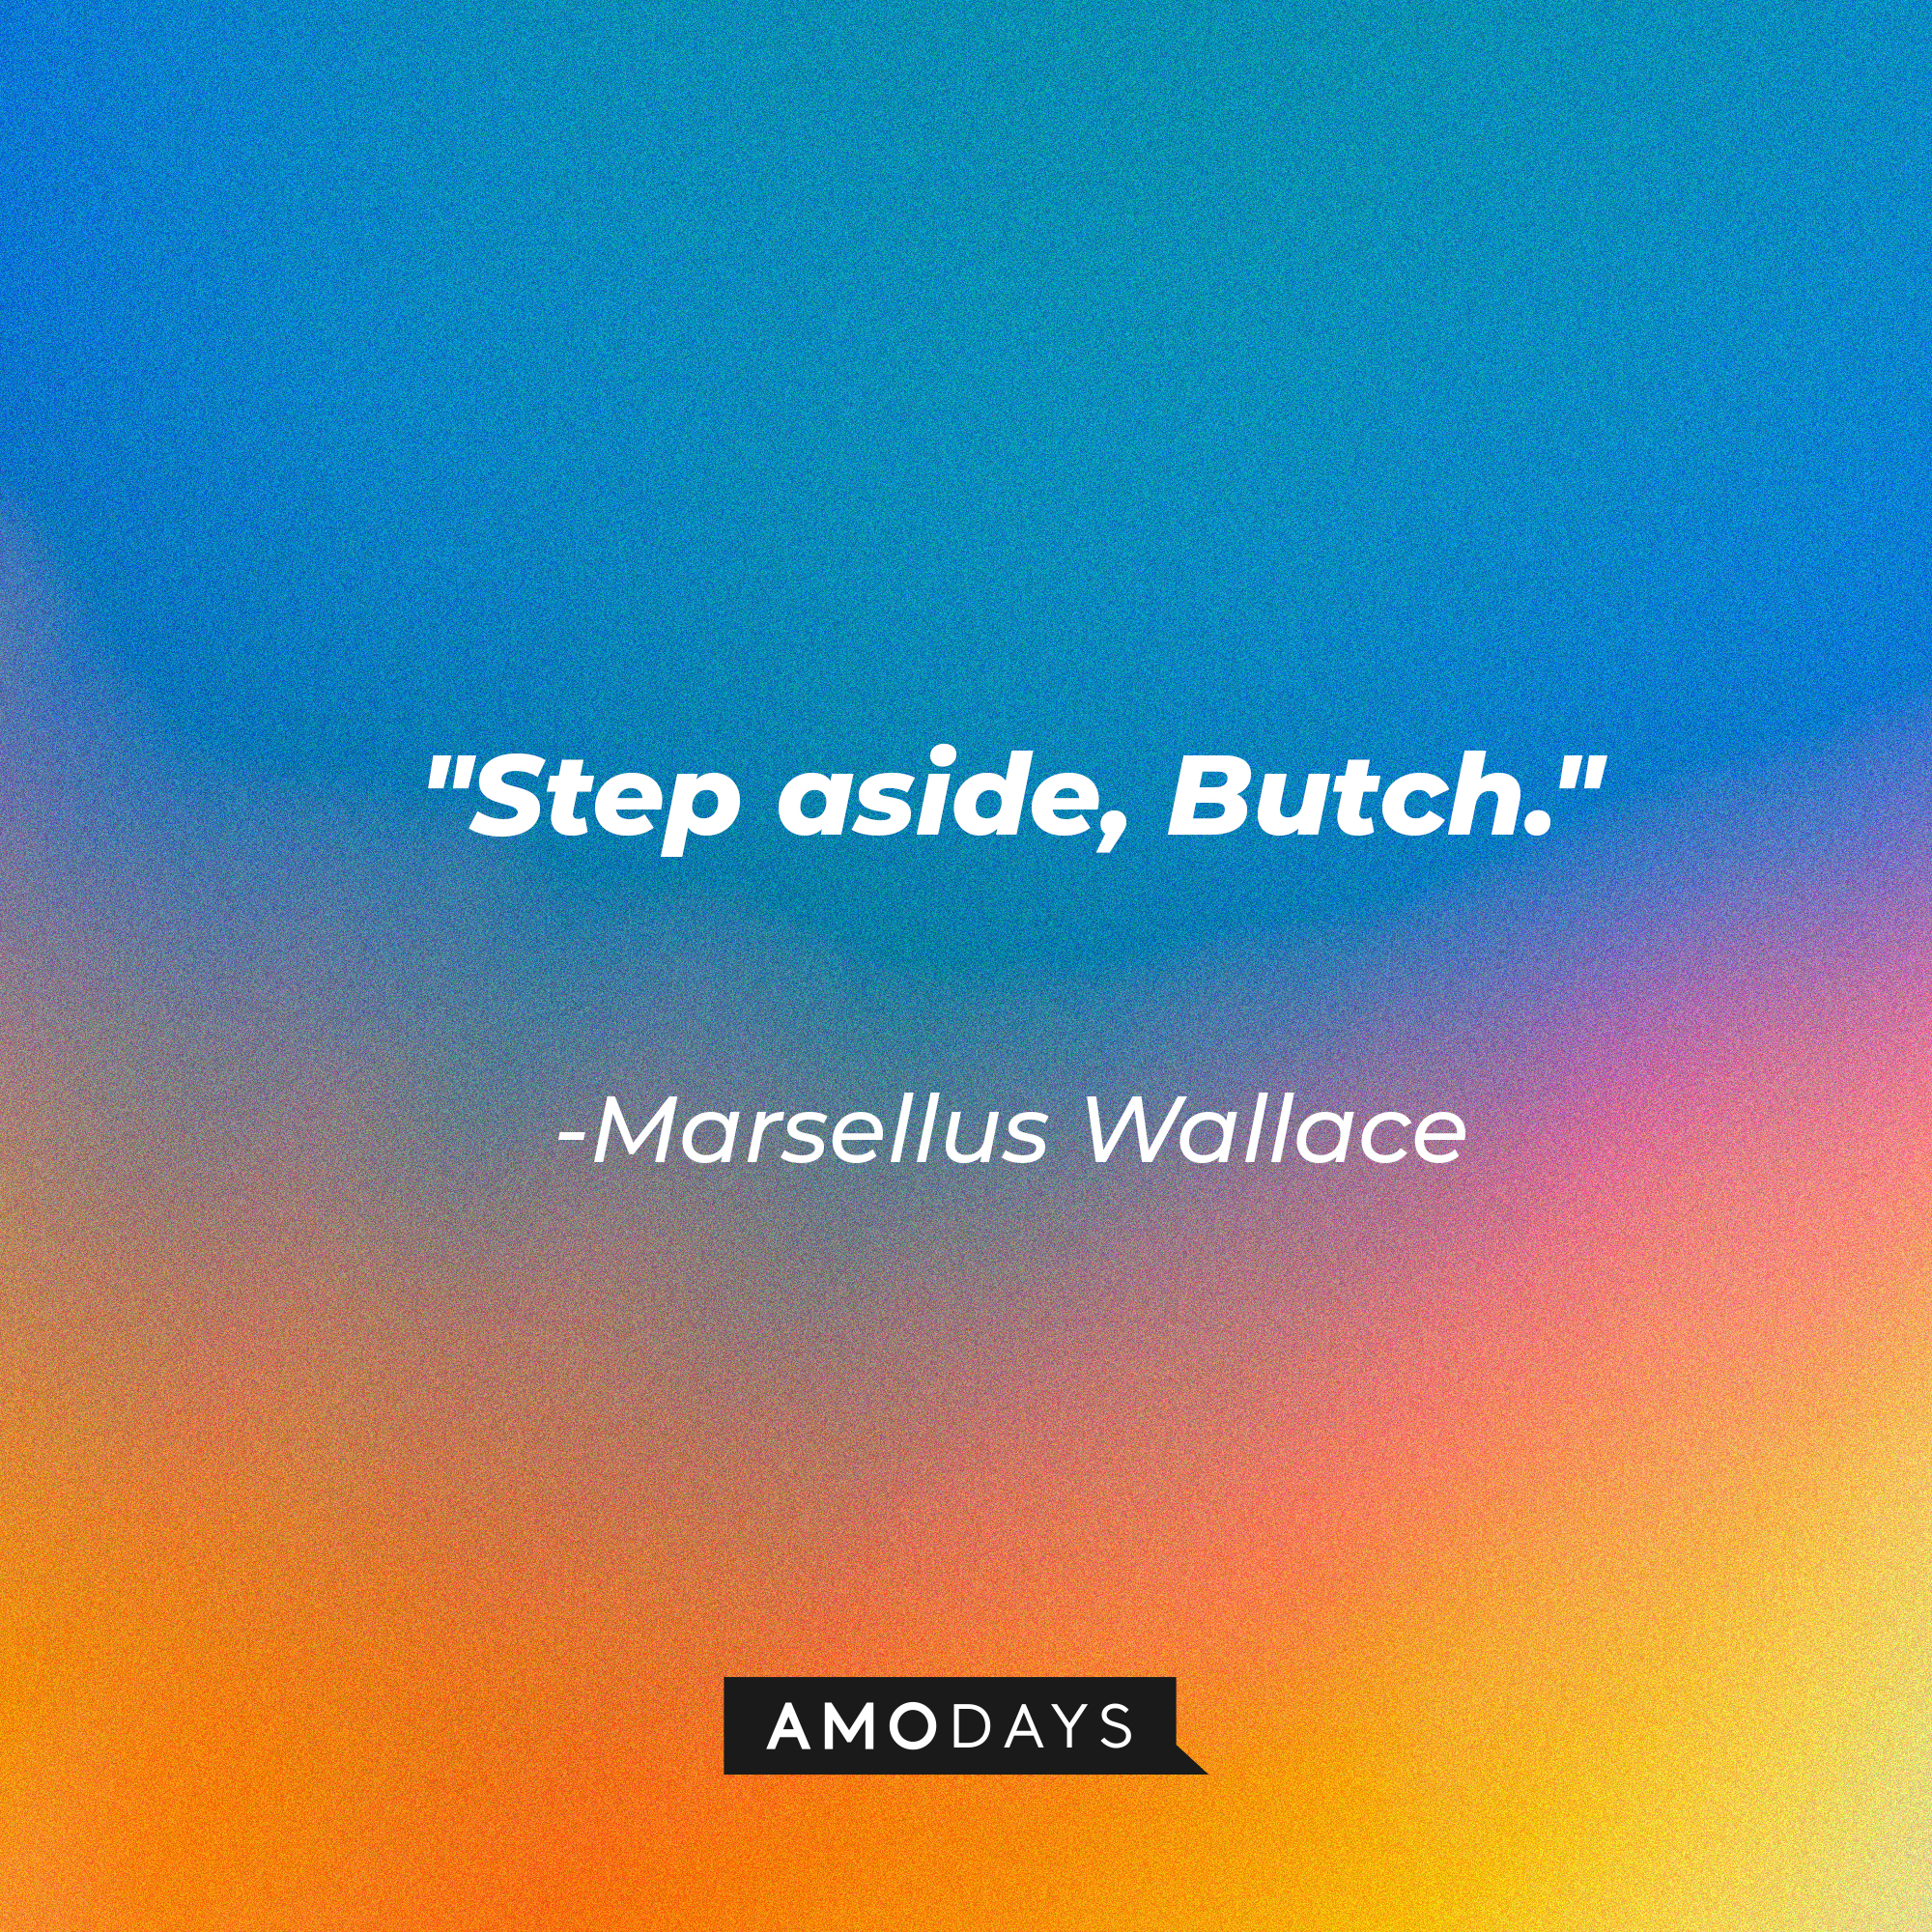 Marsellus Wallace's quote: "Step aside, Butch." | Source: AmoDays